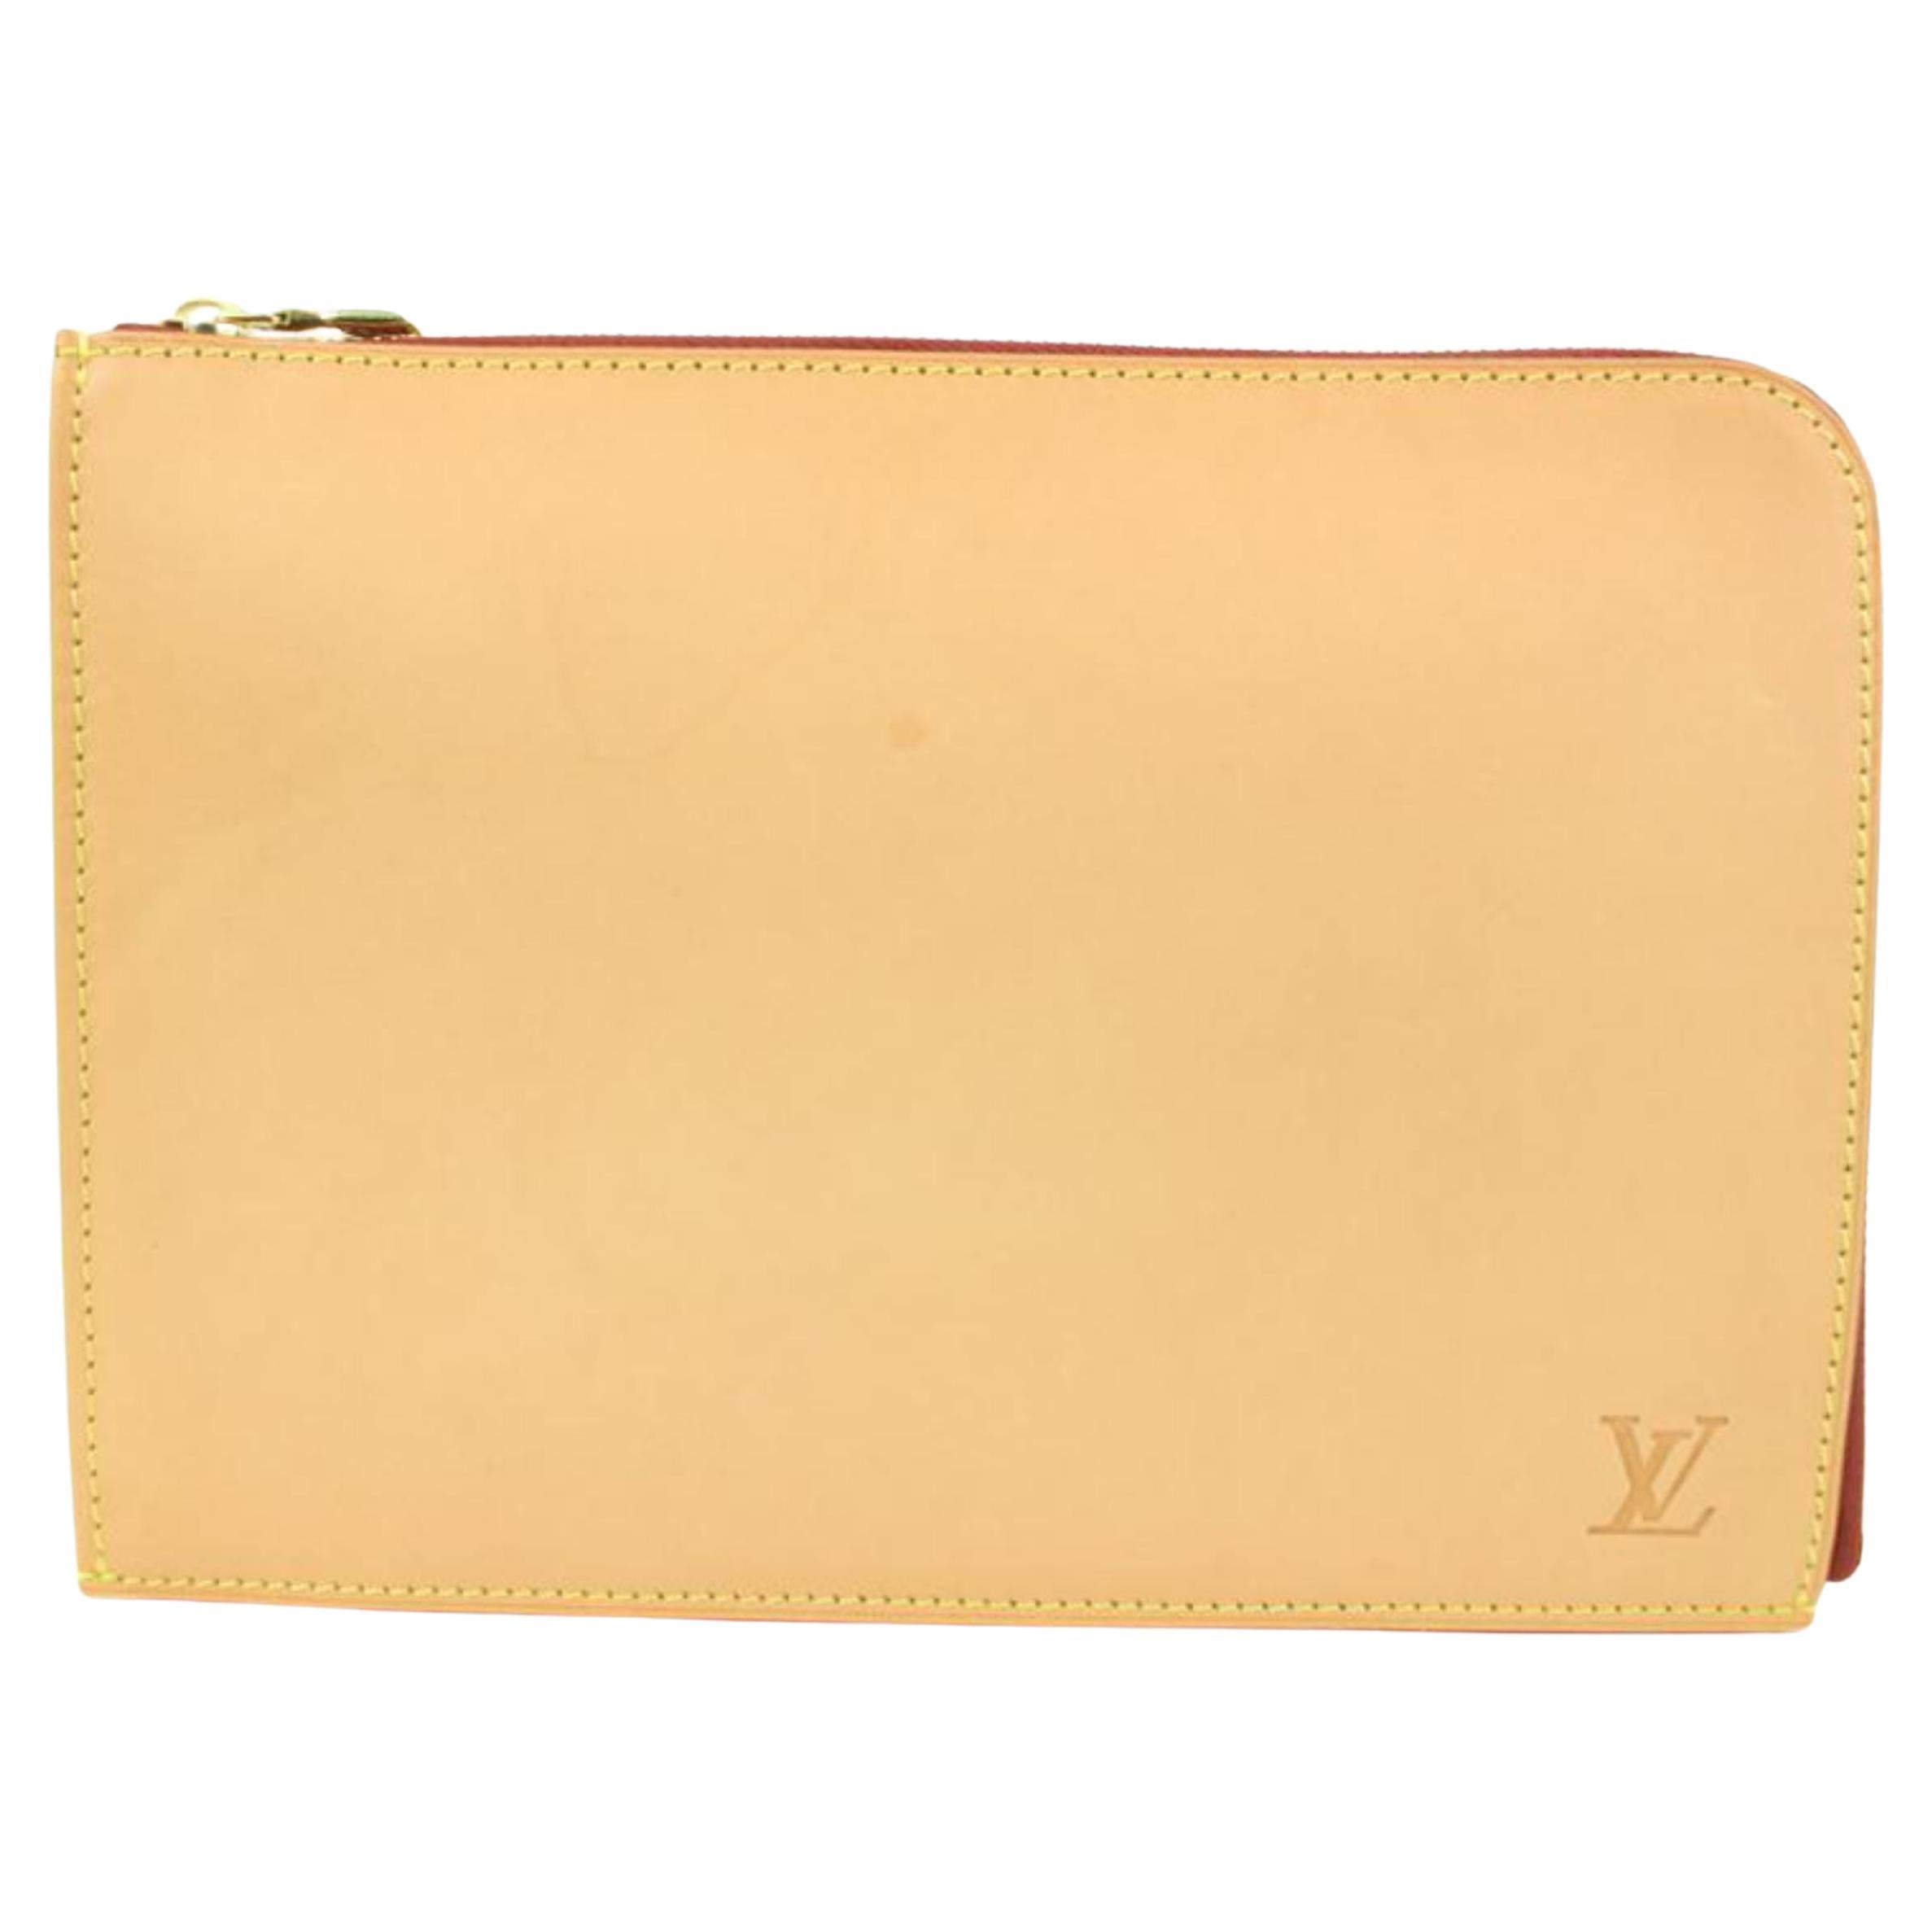 Louis Vuitton Limited Edition By The Pool Kirigami Single Small Envelope  Pouch in Peach Mist - SOLD